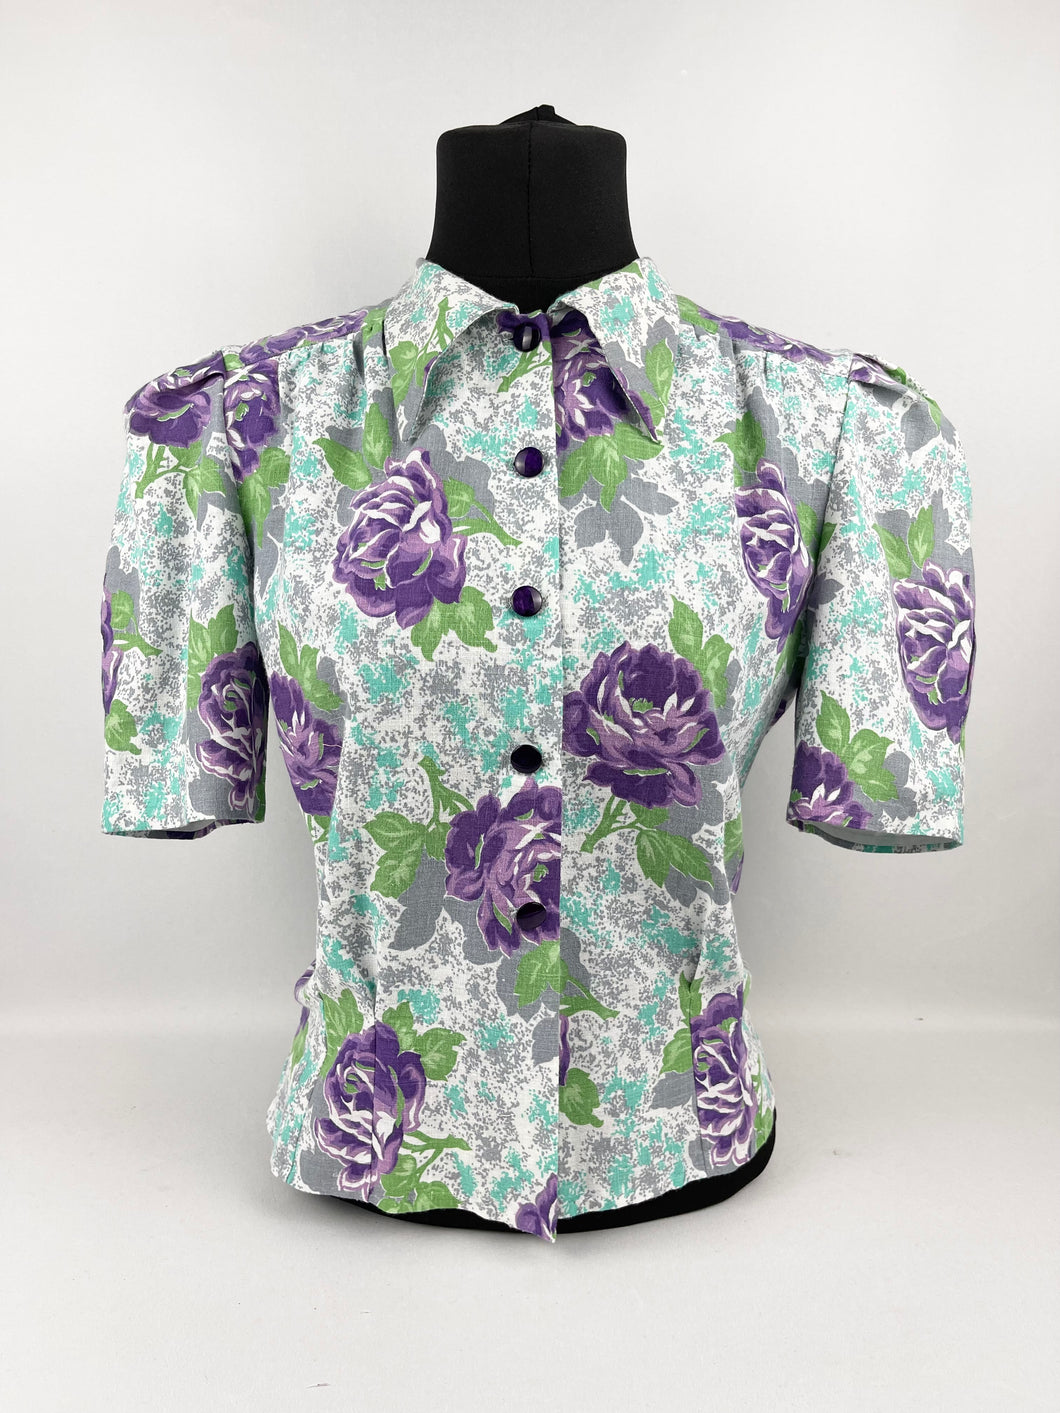 1940's Reproduction Floral Print Blouse with Large Purple Roses and Grey Buttons Made From and Original 1940's Feed Sack - Bust 34